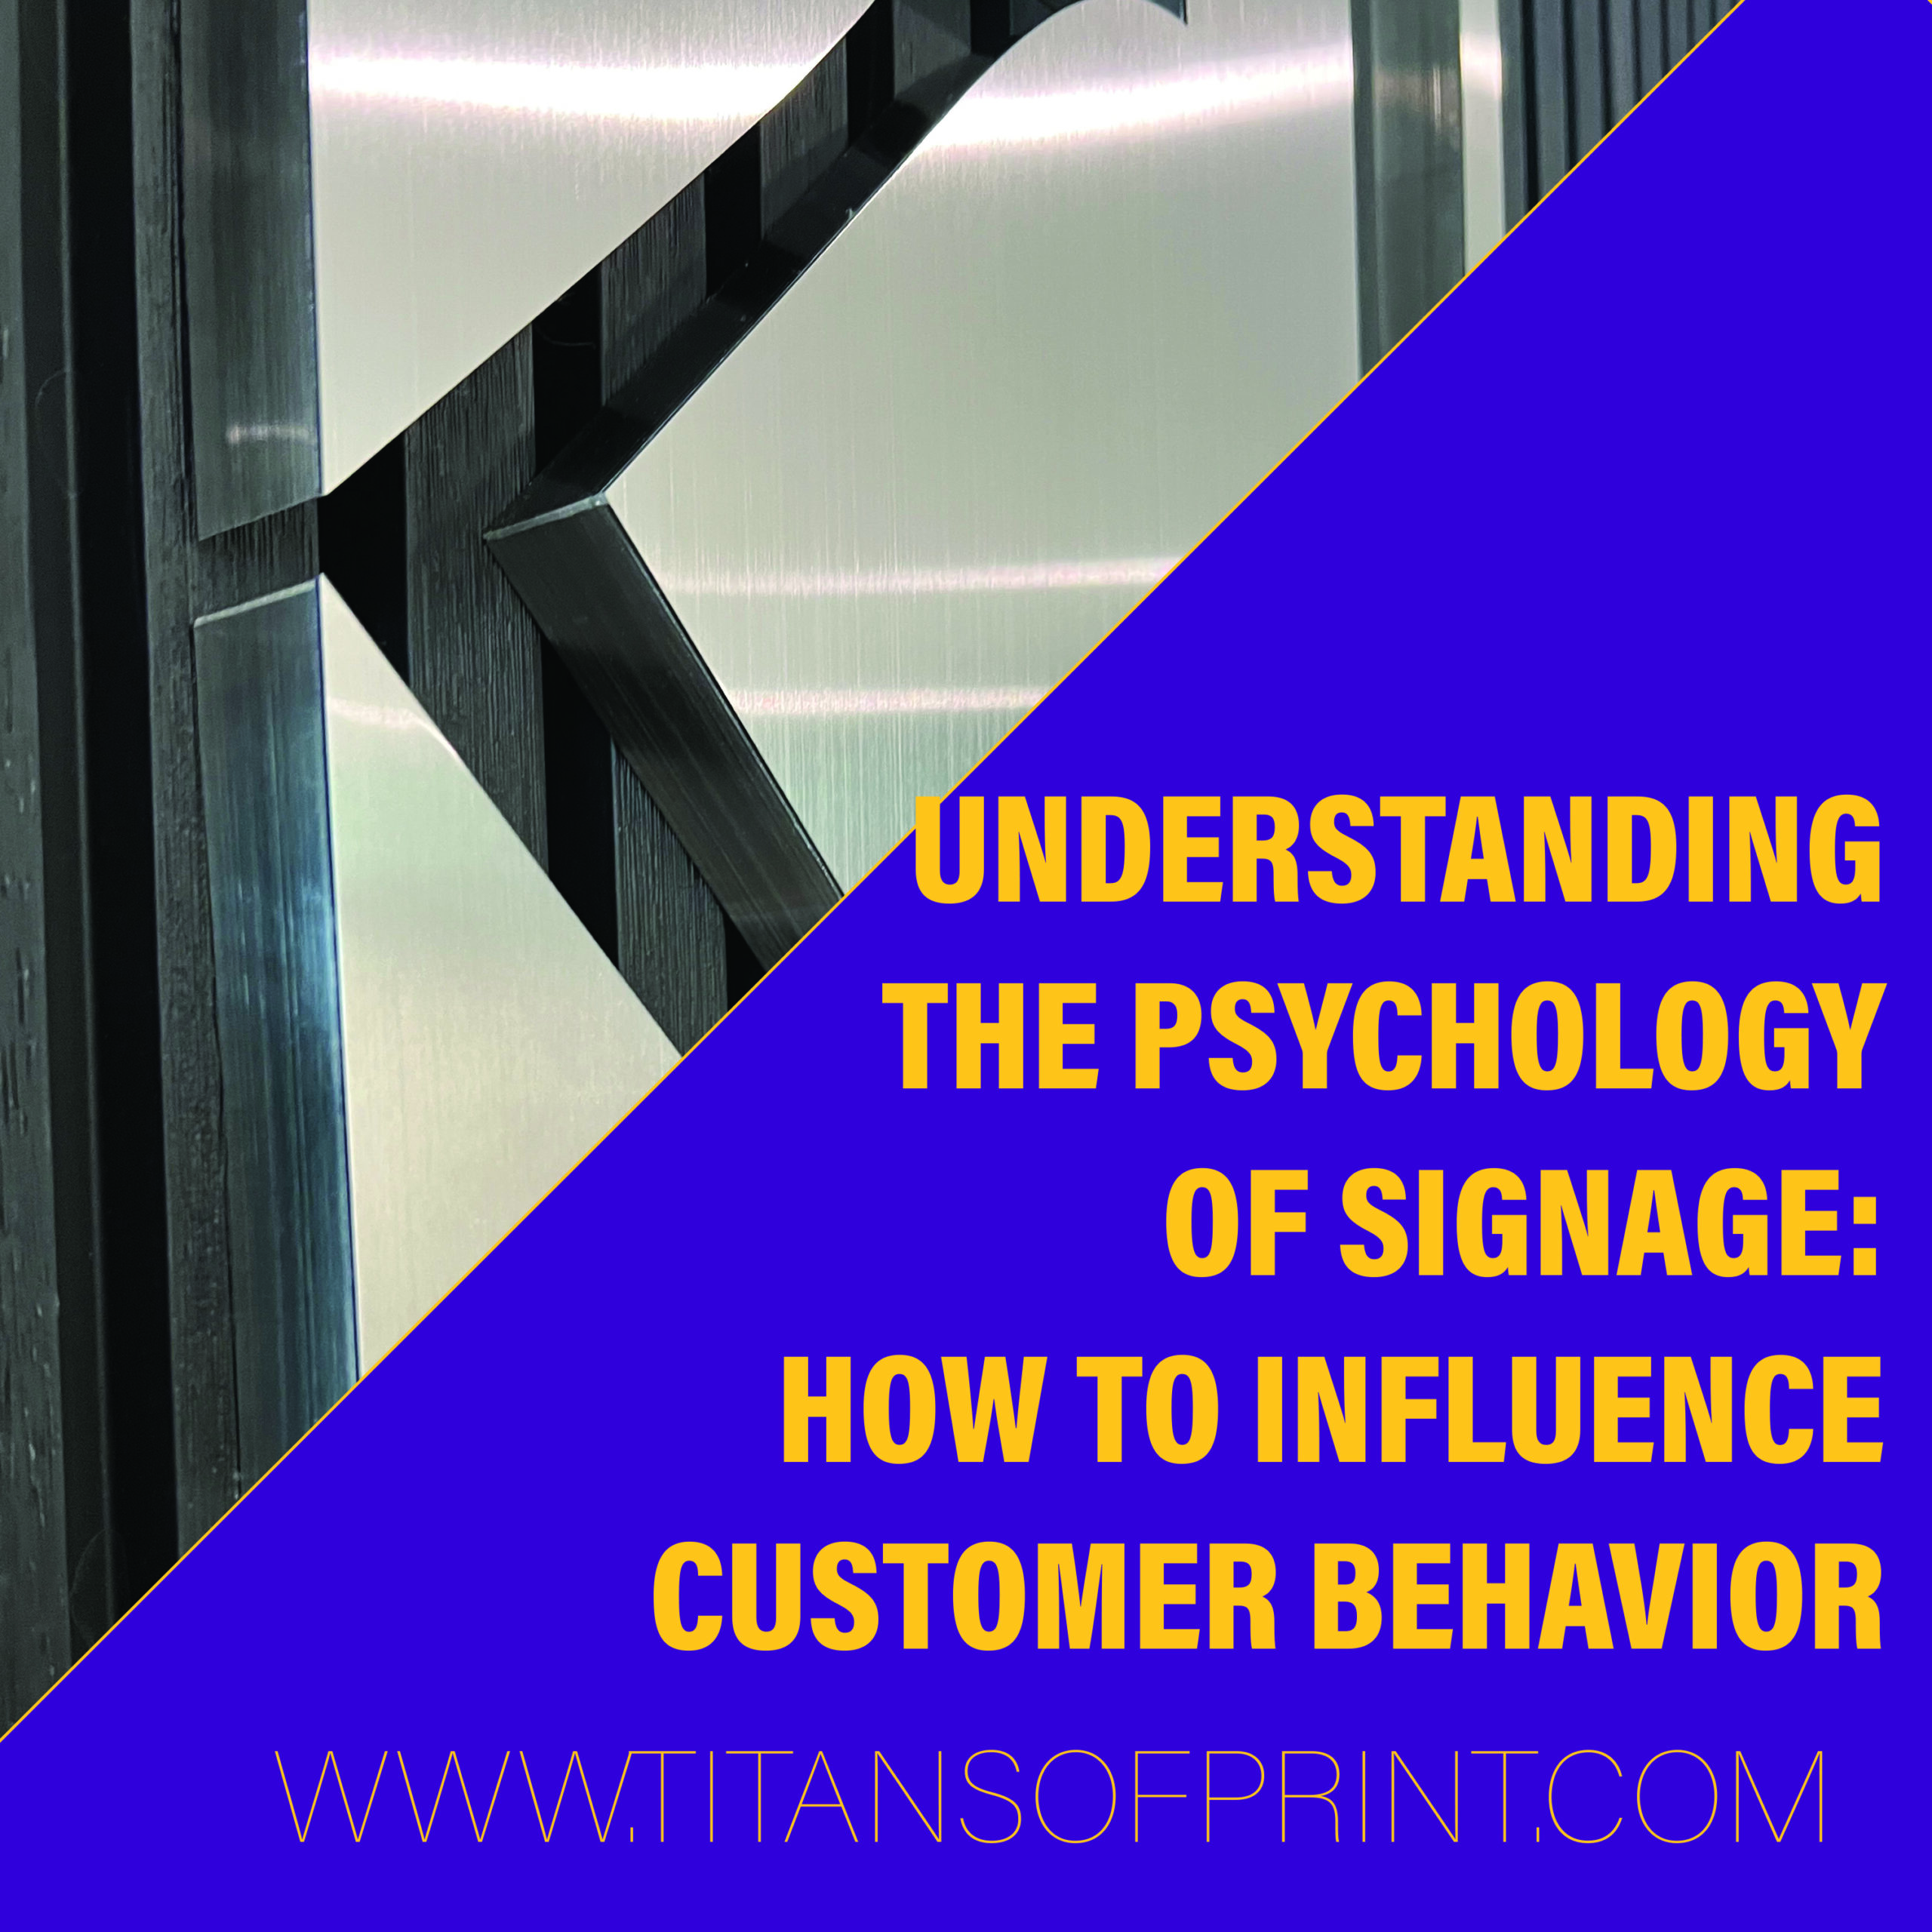 Understanding the Psychology of Signage: How to Influence Customer Behavior